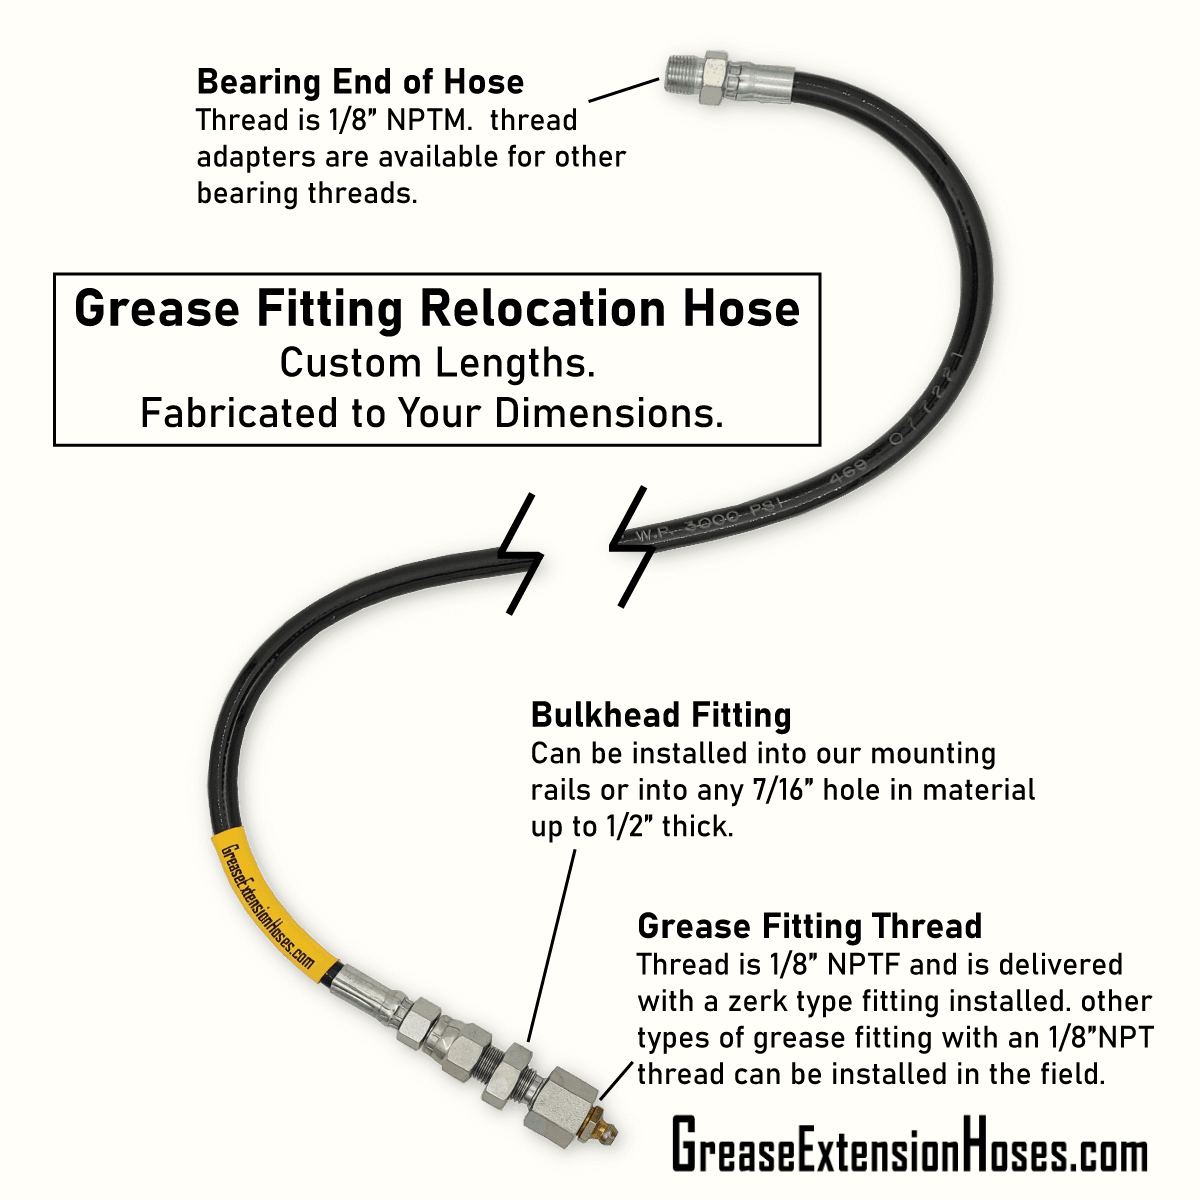 Grease Fitting Relocation Hose Available in Custom Lengths From 1 Foot to 12 Feet Long